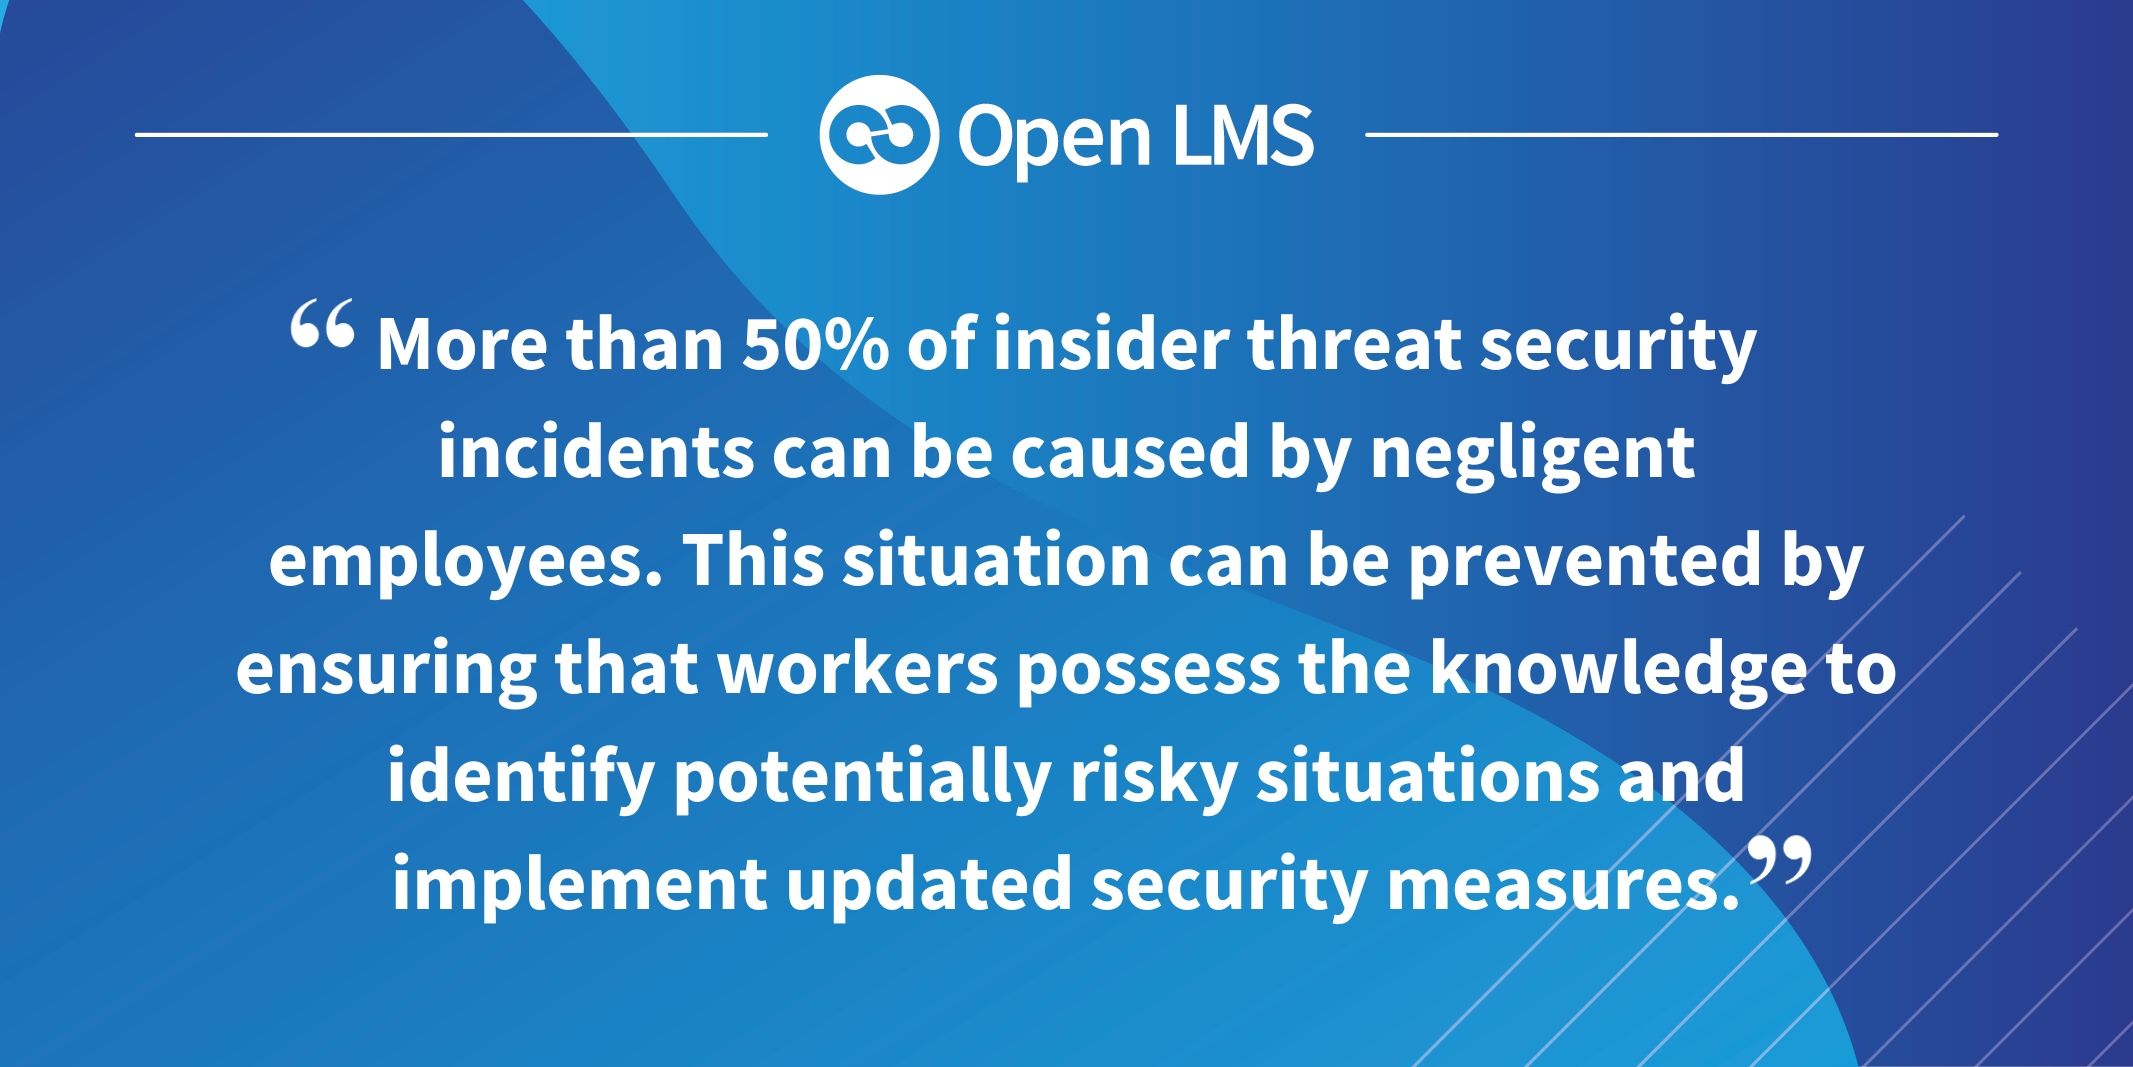 More than 50% of insider threat security incidents can be caused by negligent employees. This situation can be prevented by ensuring that workers possess the knowledge to identify potentially risky situations and implement updated security measures